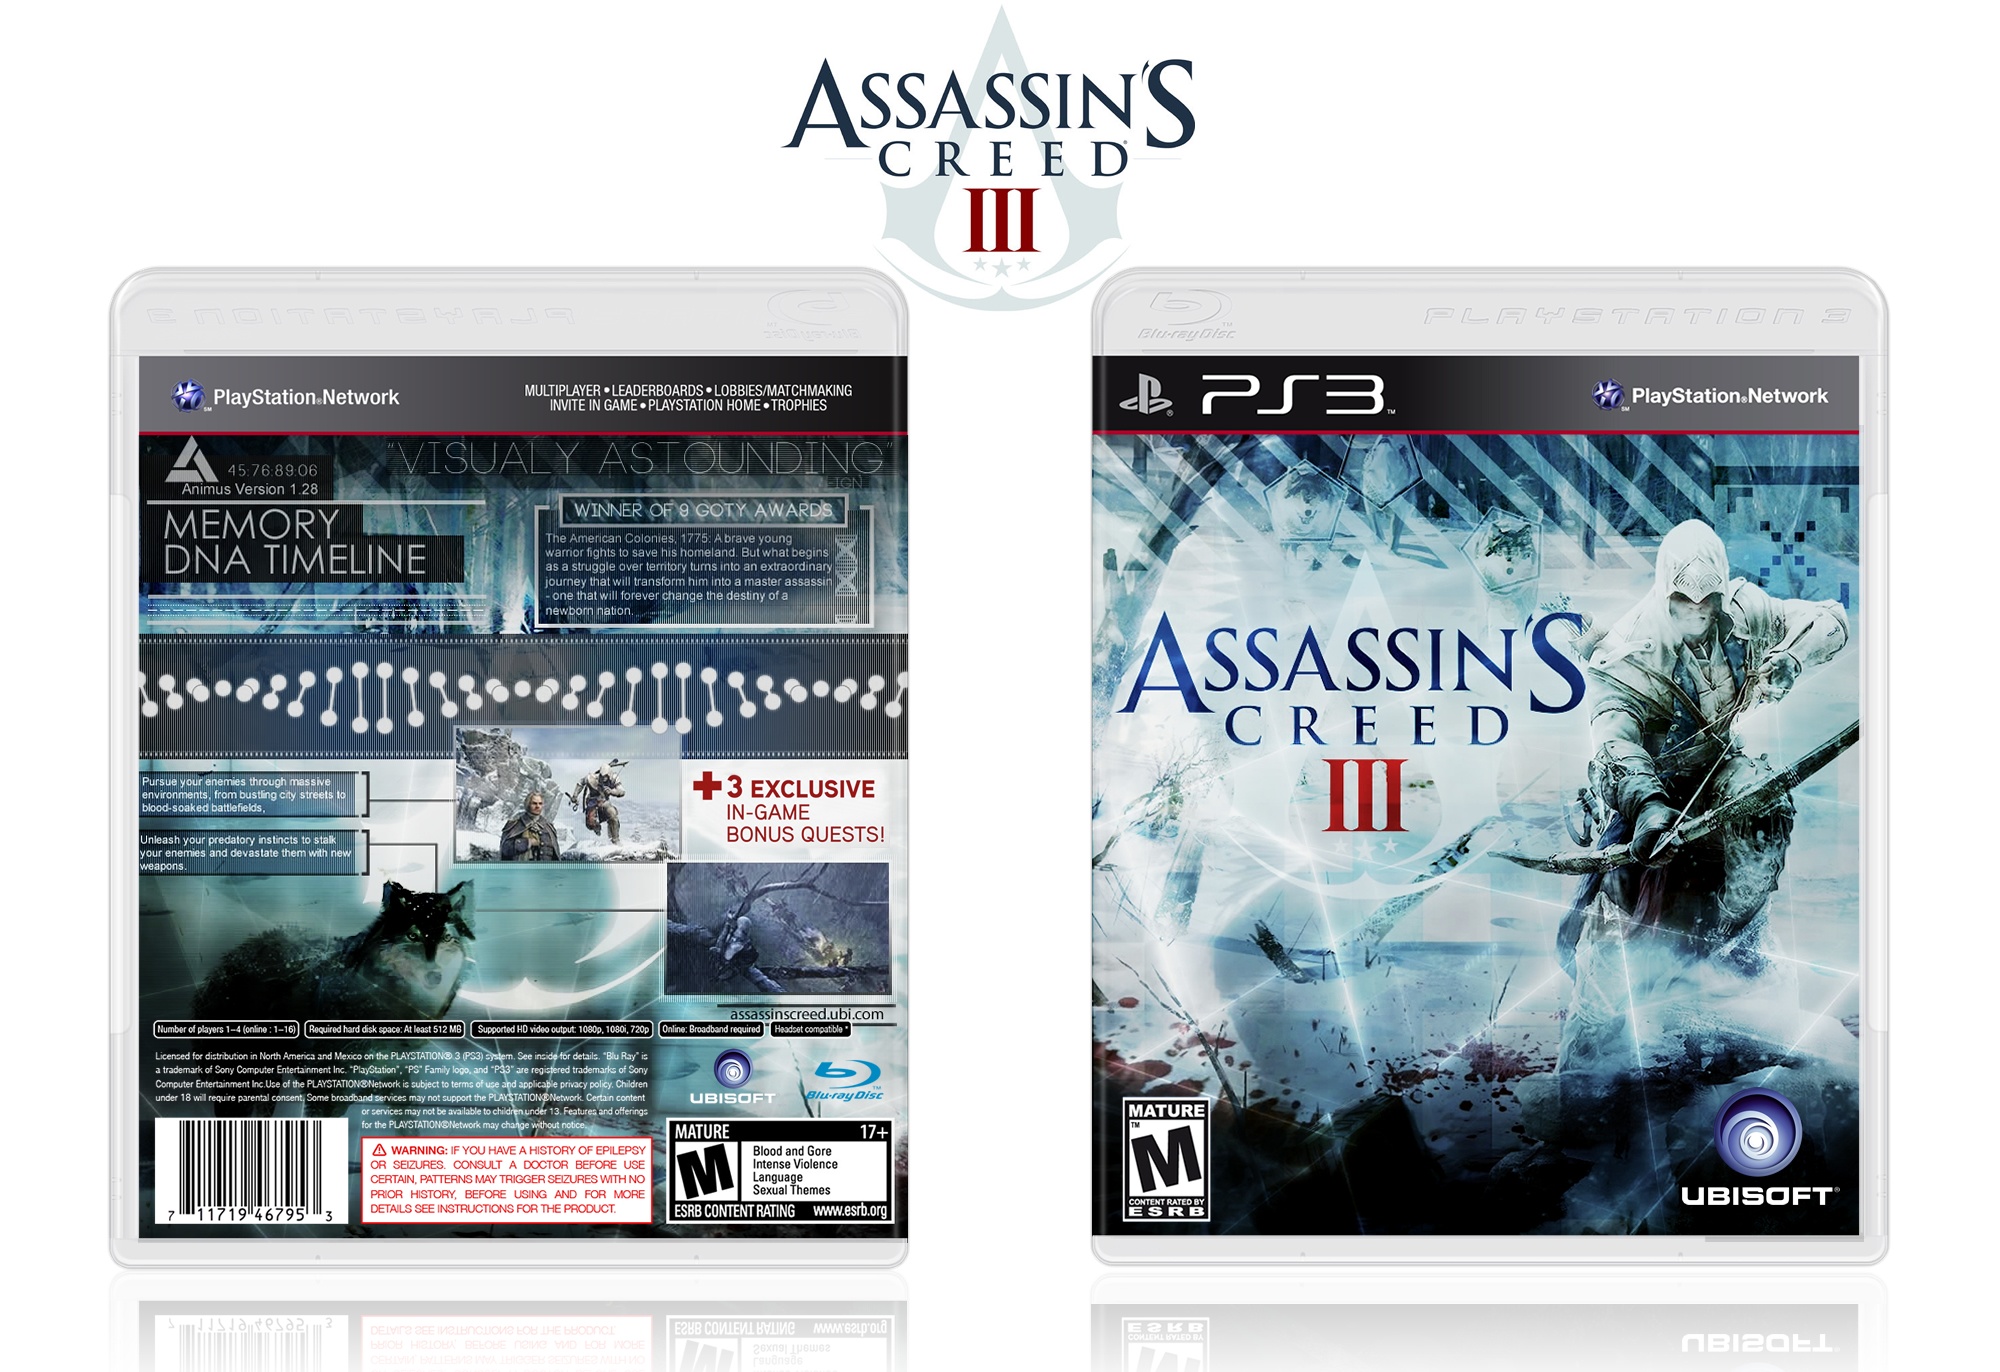 Assassin's Creed 3 box cover